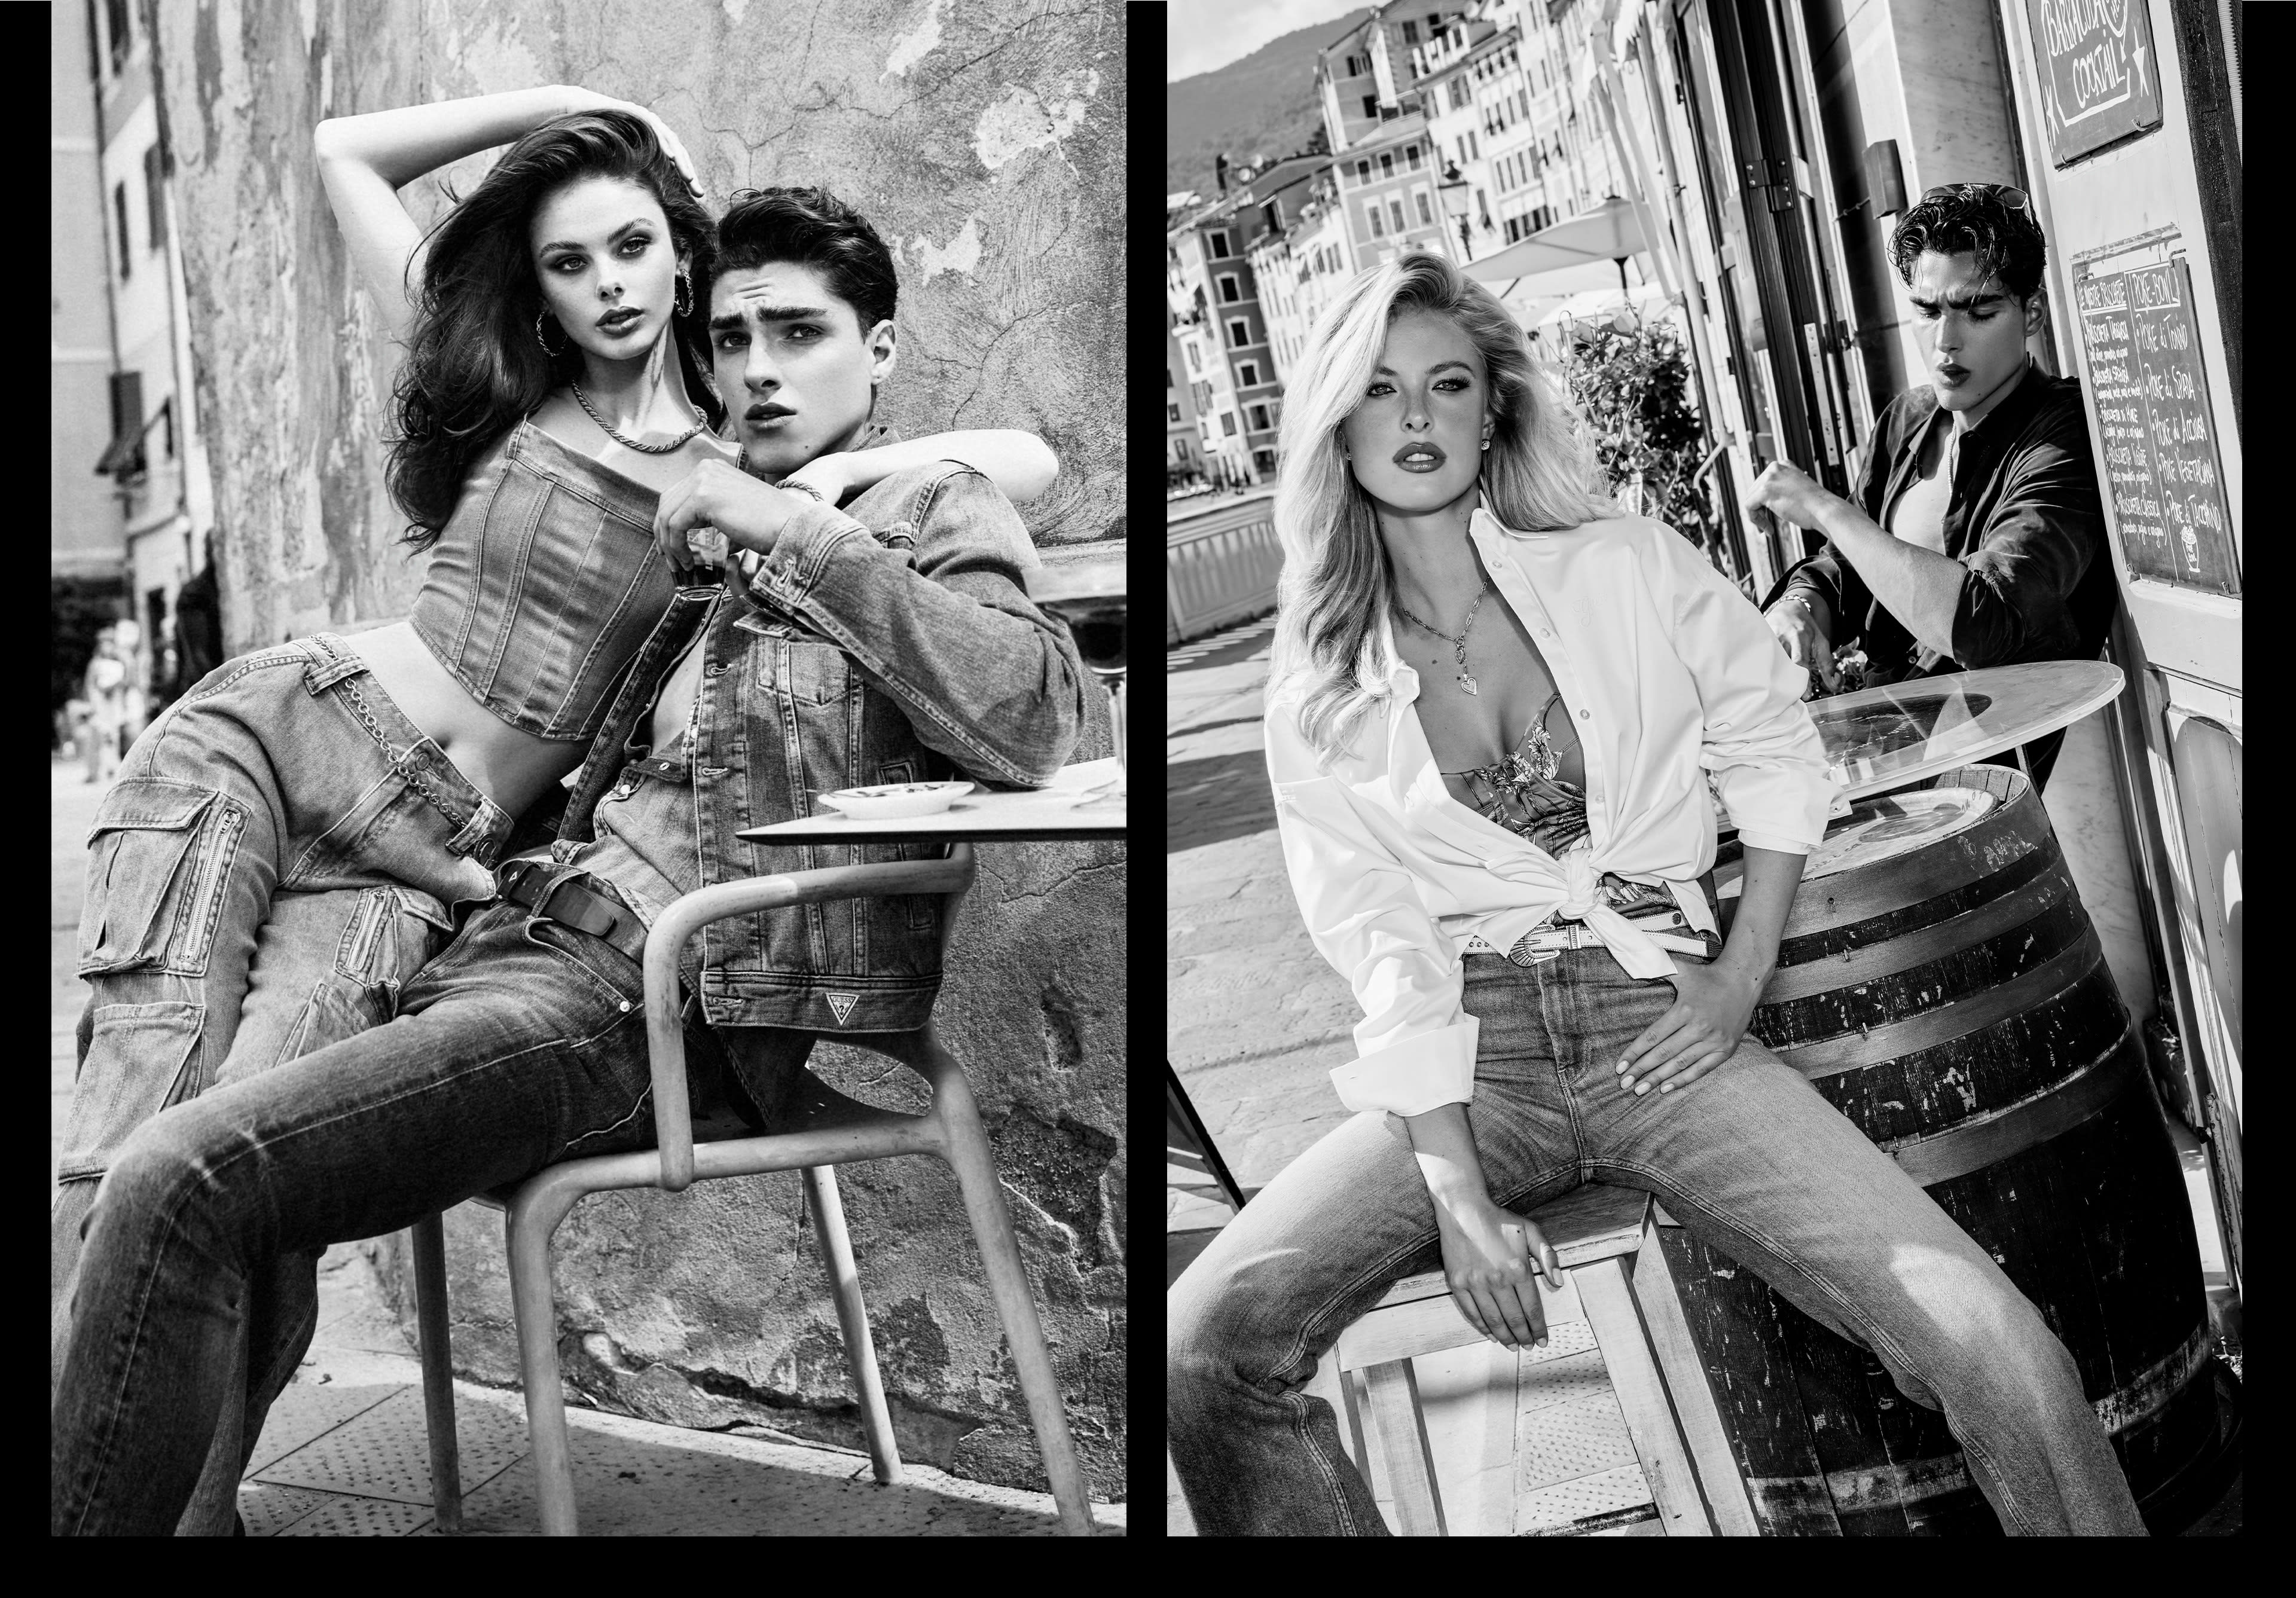 Forever Iconic: Experience life in timeless denim for men and women